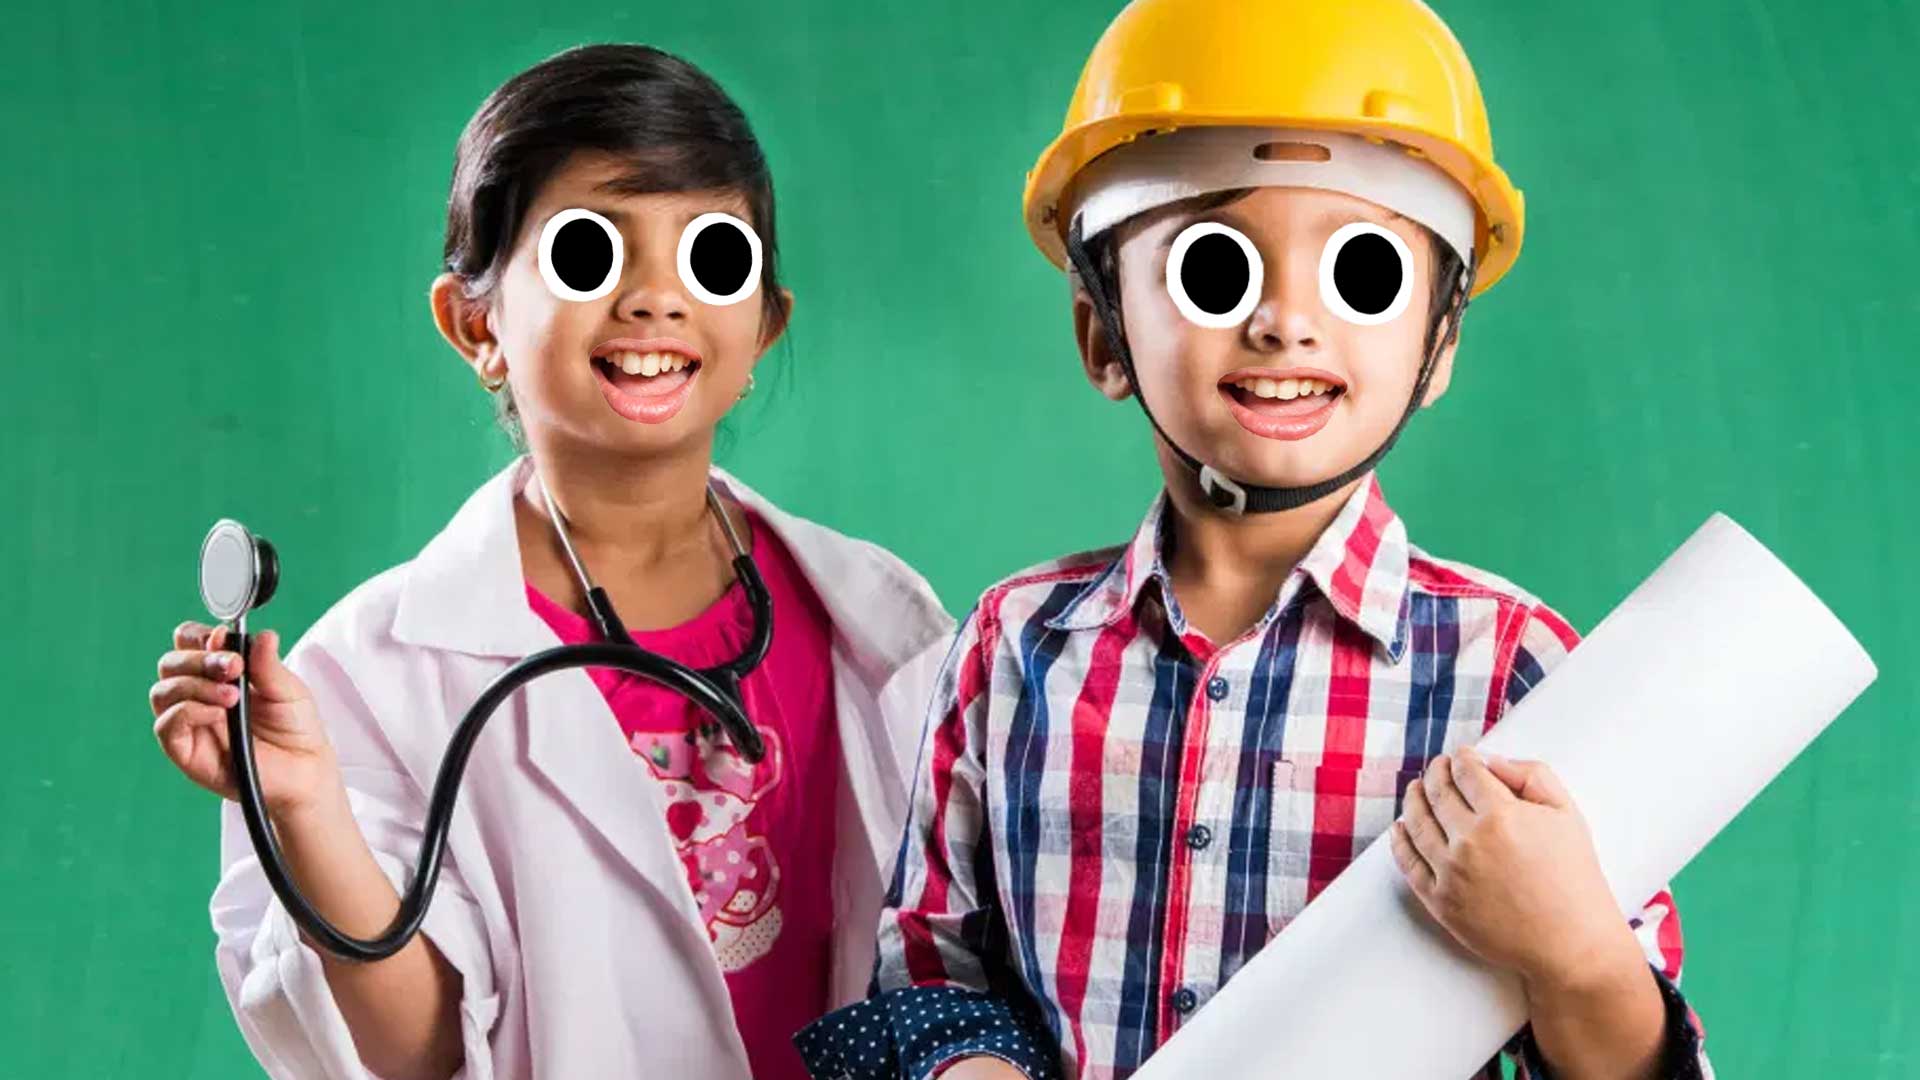 Two children dressed as a doctor and a construction worker